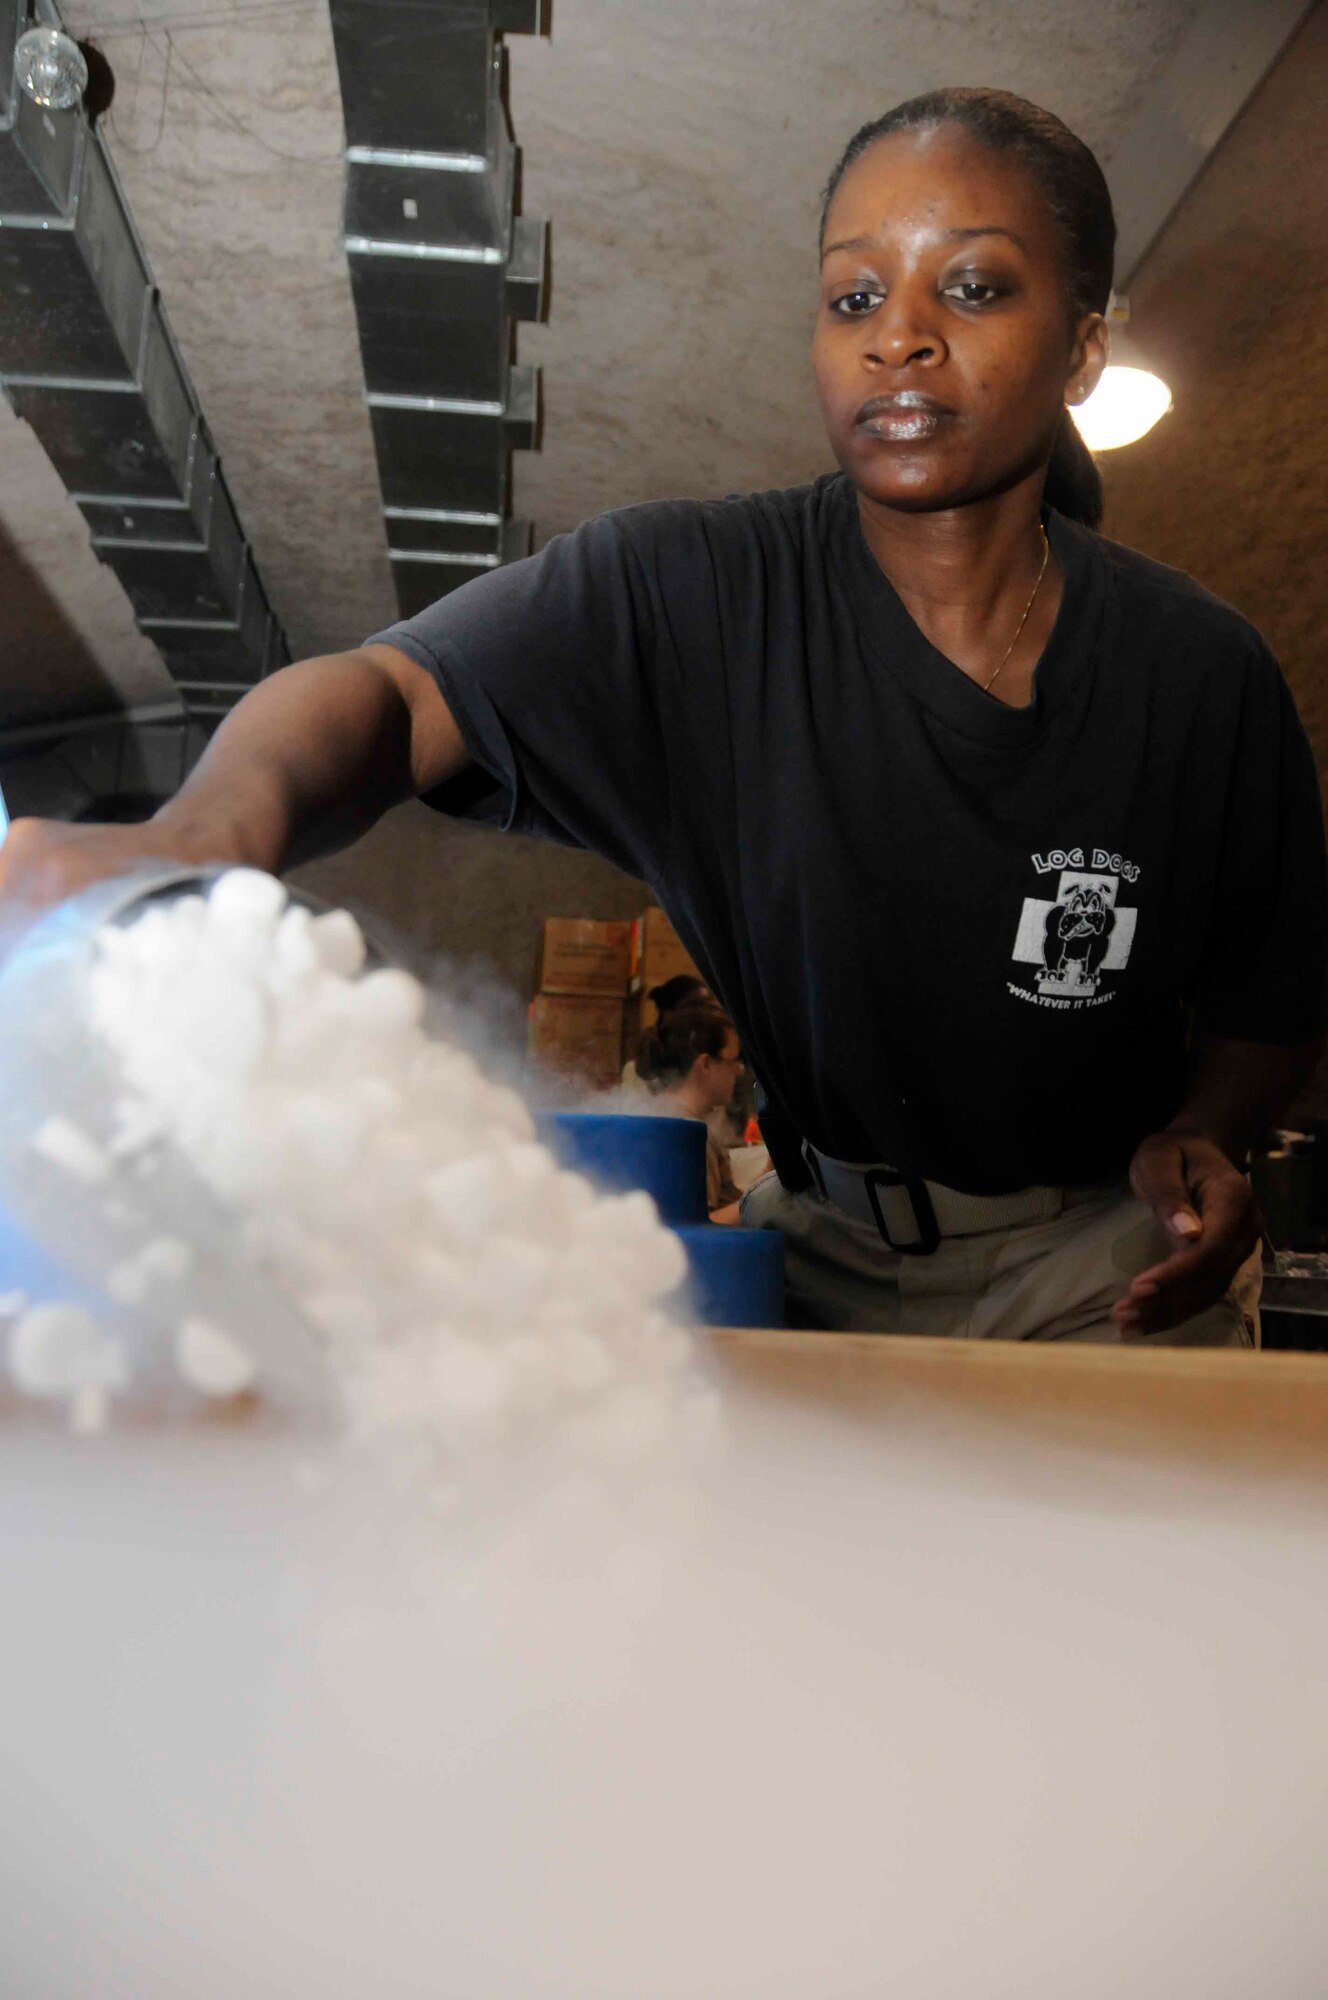 Tech. Sgt. Paula Todd, NCOIC of the BTC, scoops dry ice into a box used for shipping blood May 6. Sergeant Todd is responsible for inventory and shipment of blood products throughout the Persian Gulf region.